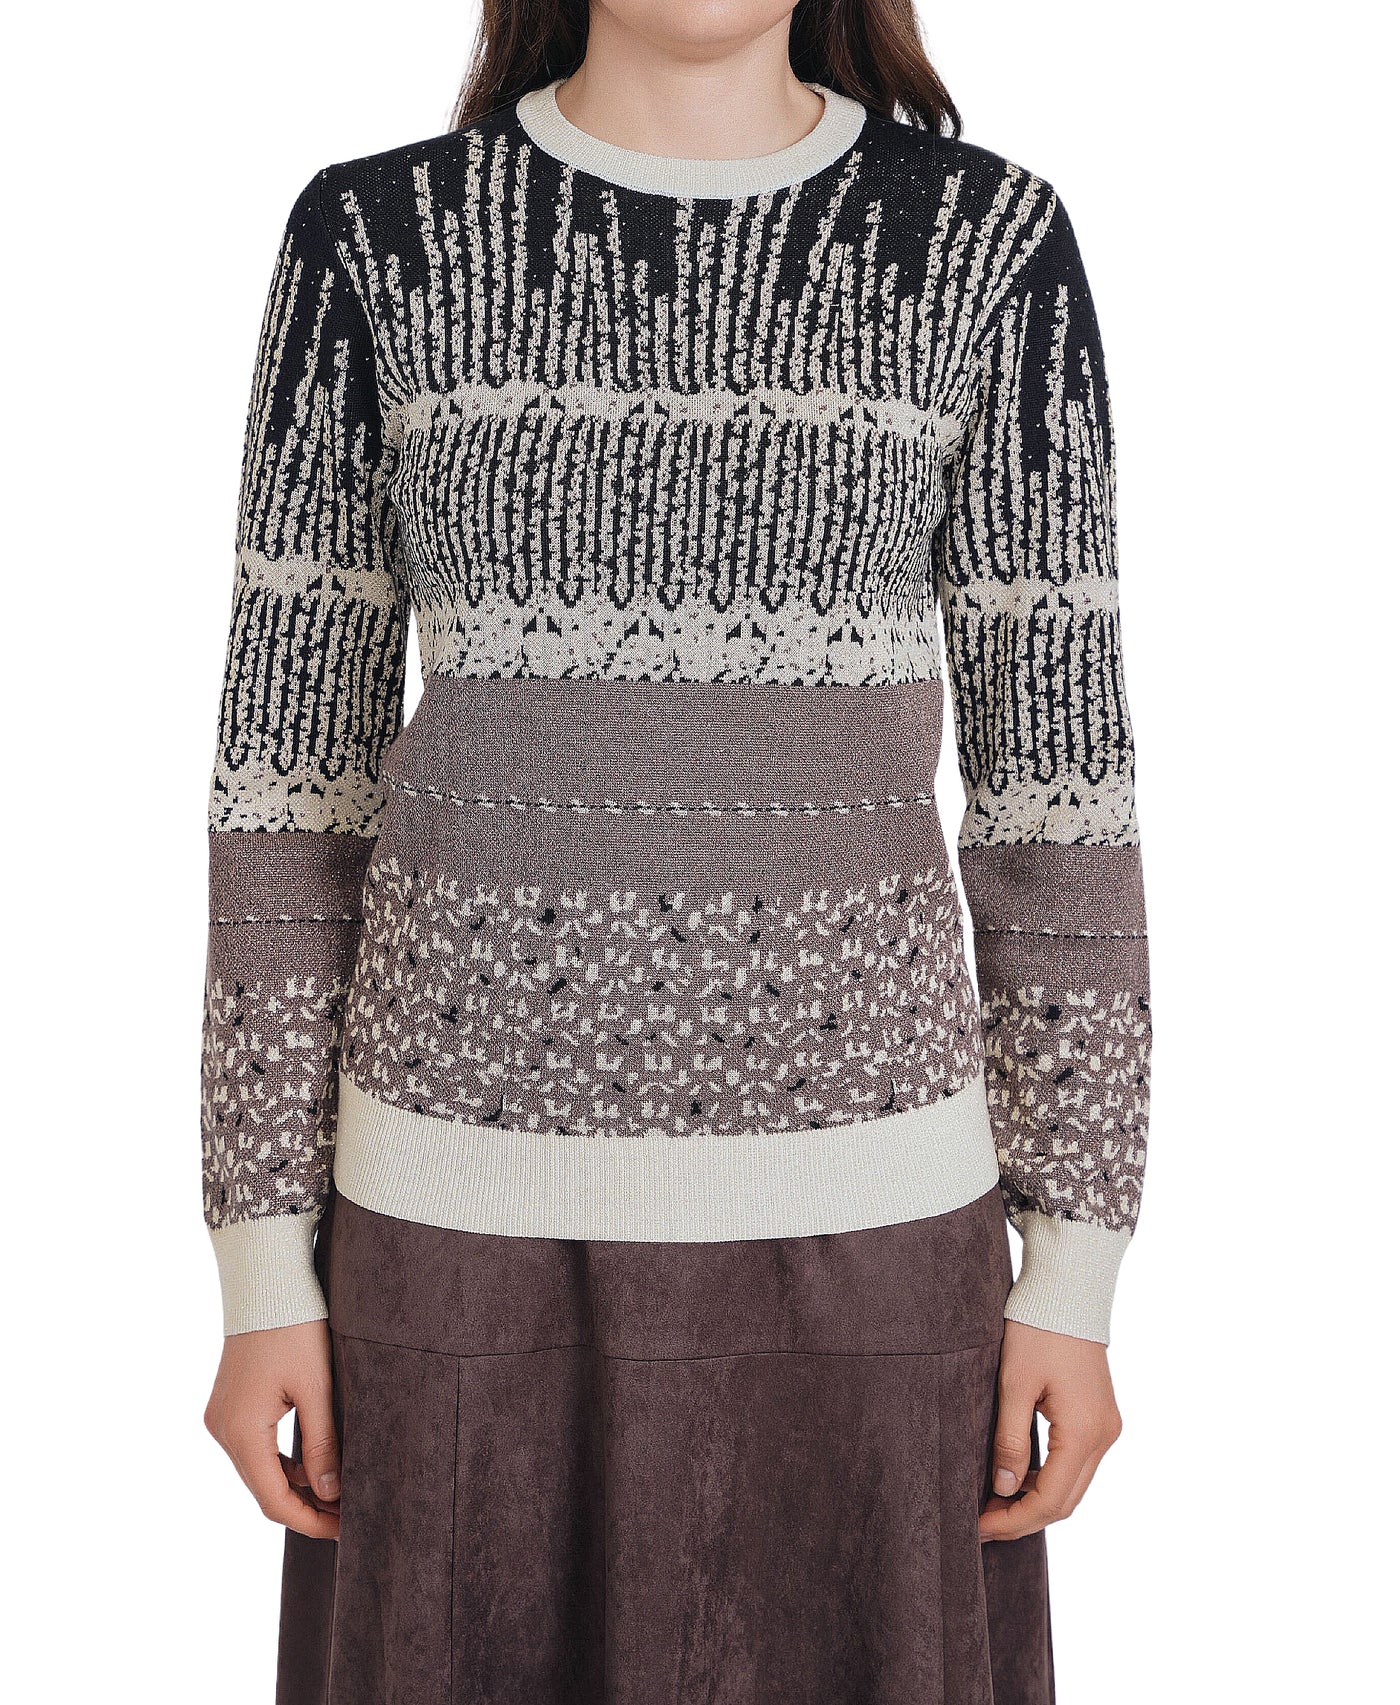 Shimmer Print Sweater image 1